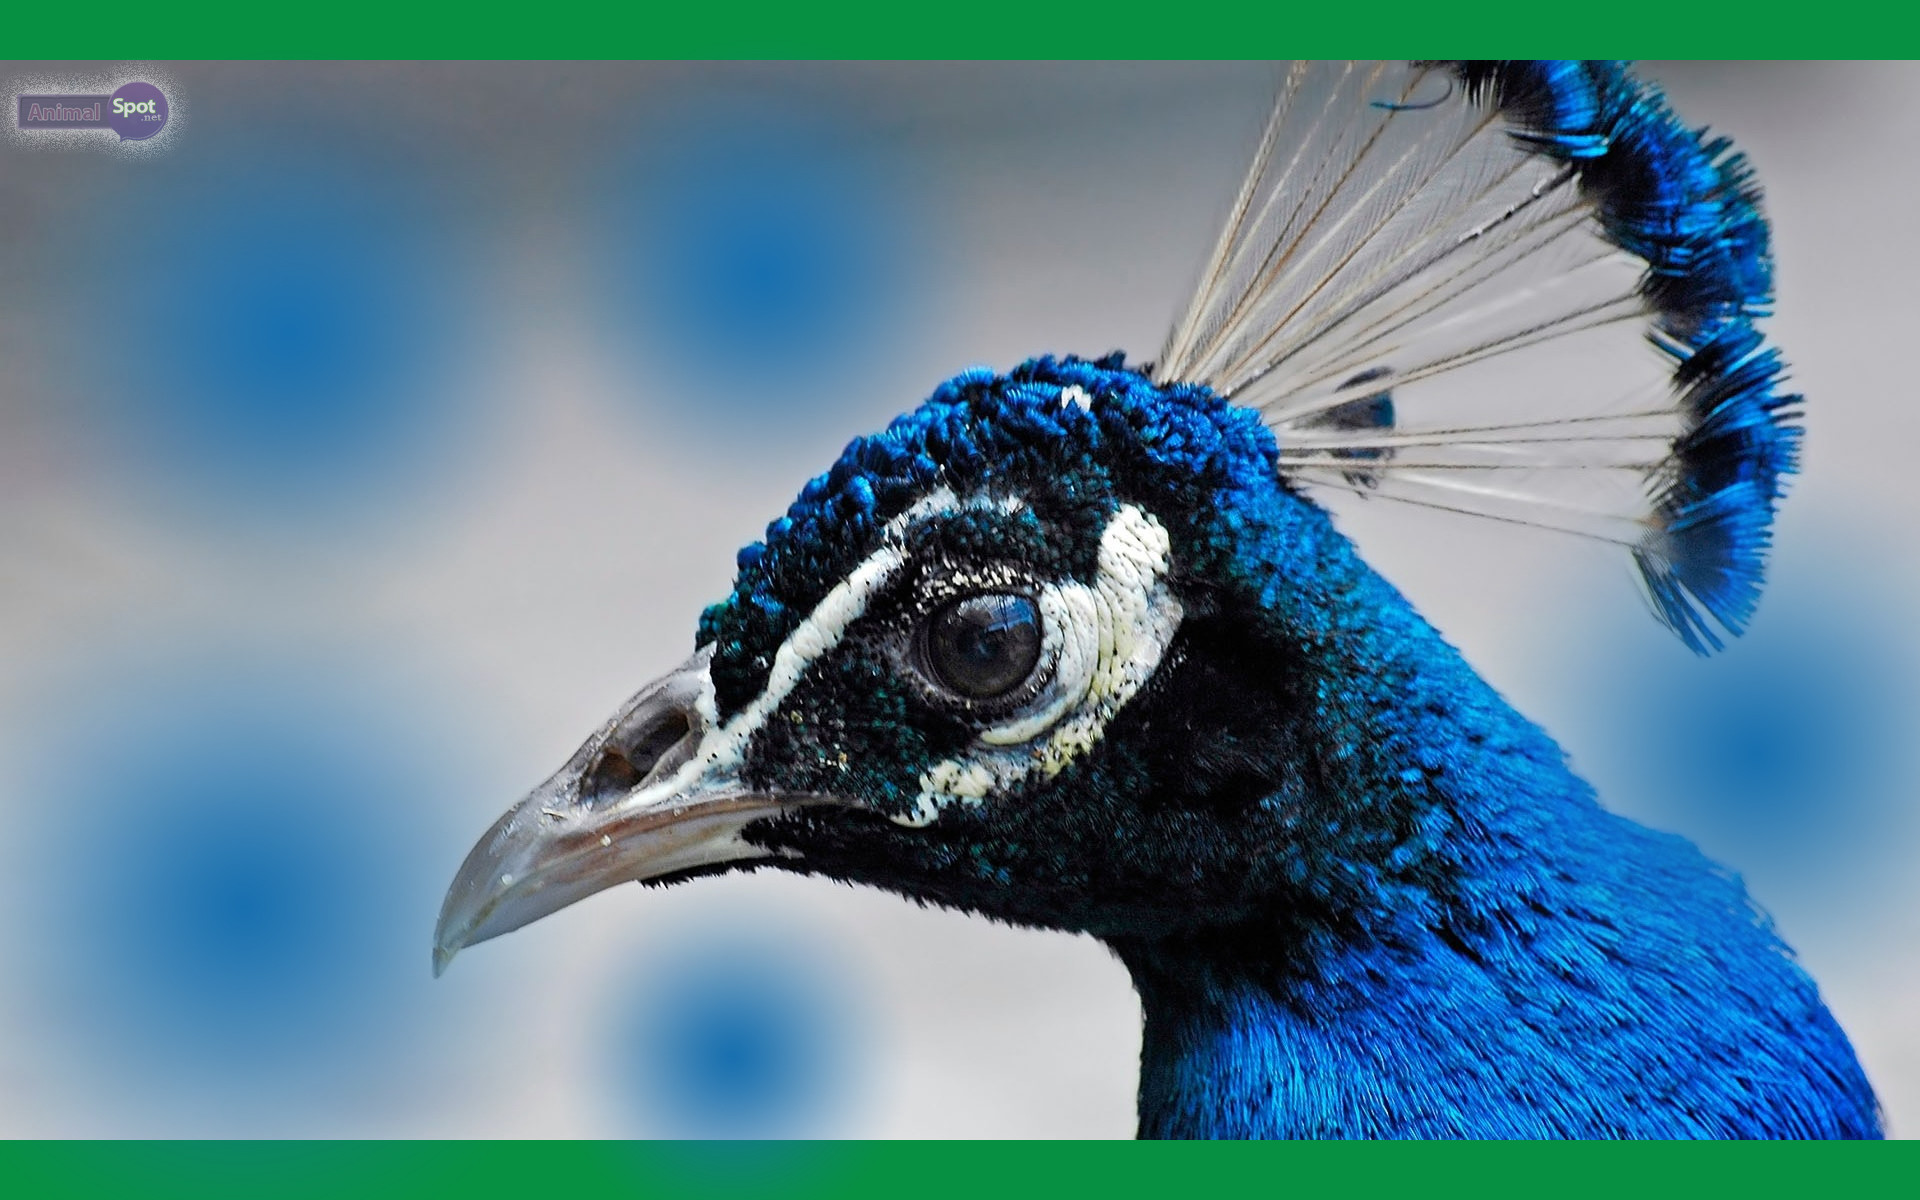 Best Peacock Wallpapers And Backgrounds 
 Data-src - Peacock Face Closeup - HD Wallpaper 